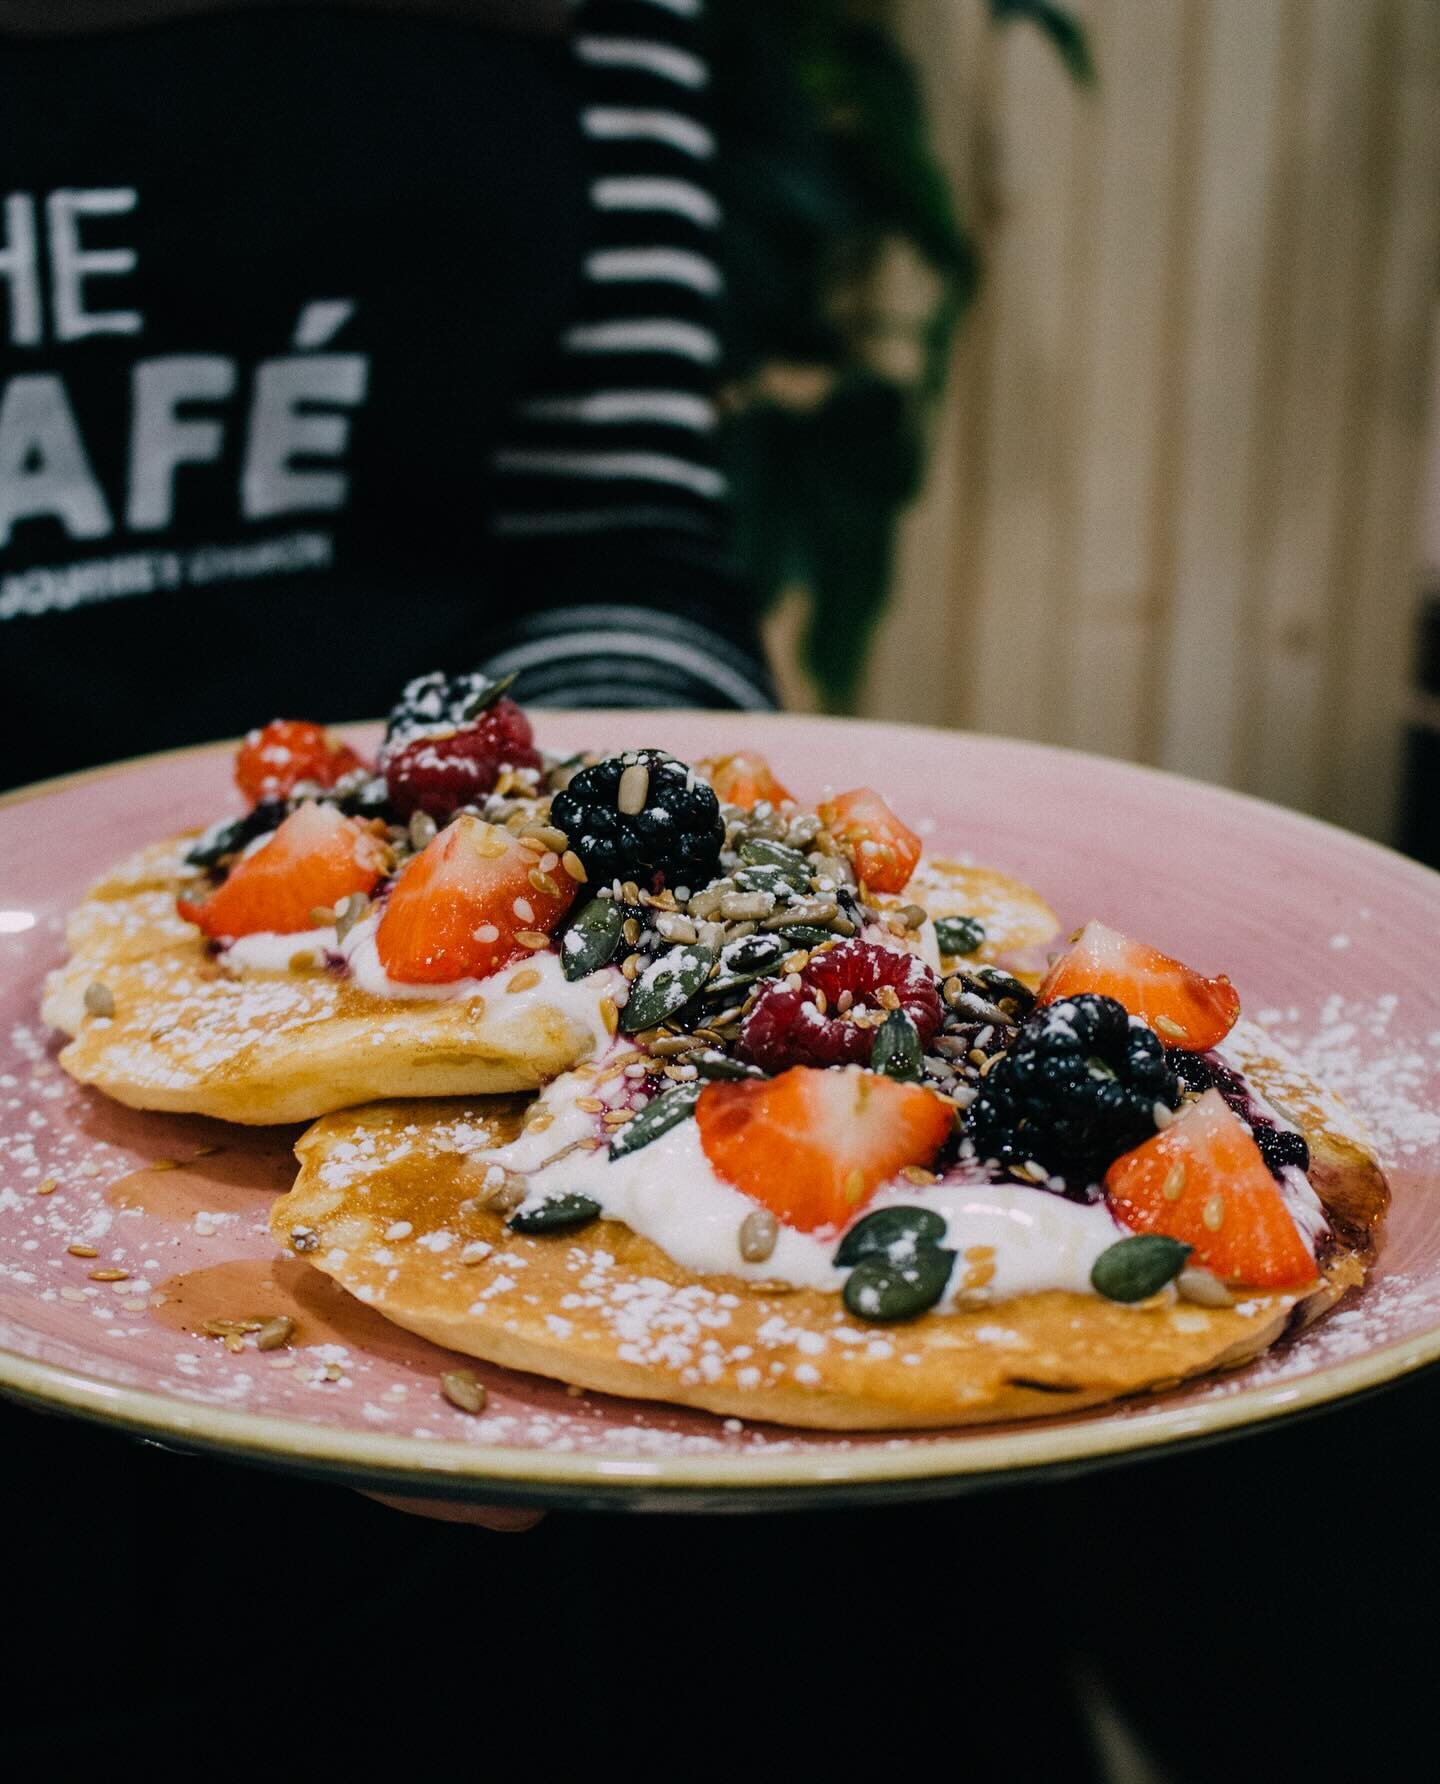 It&rsquo;s pancake 🥞 week here at The Cafe! We&rsquo;ve lots of toppings on offer&hellip; pop in to try!